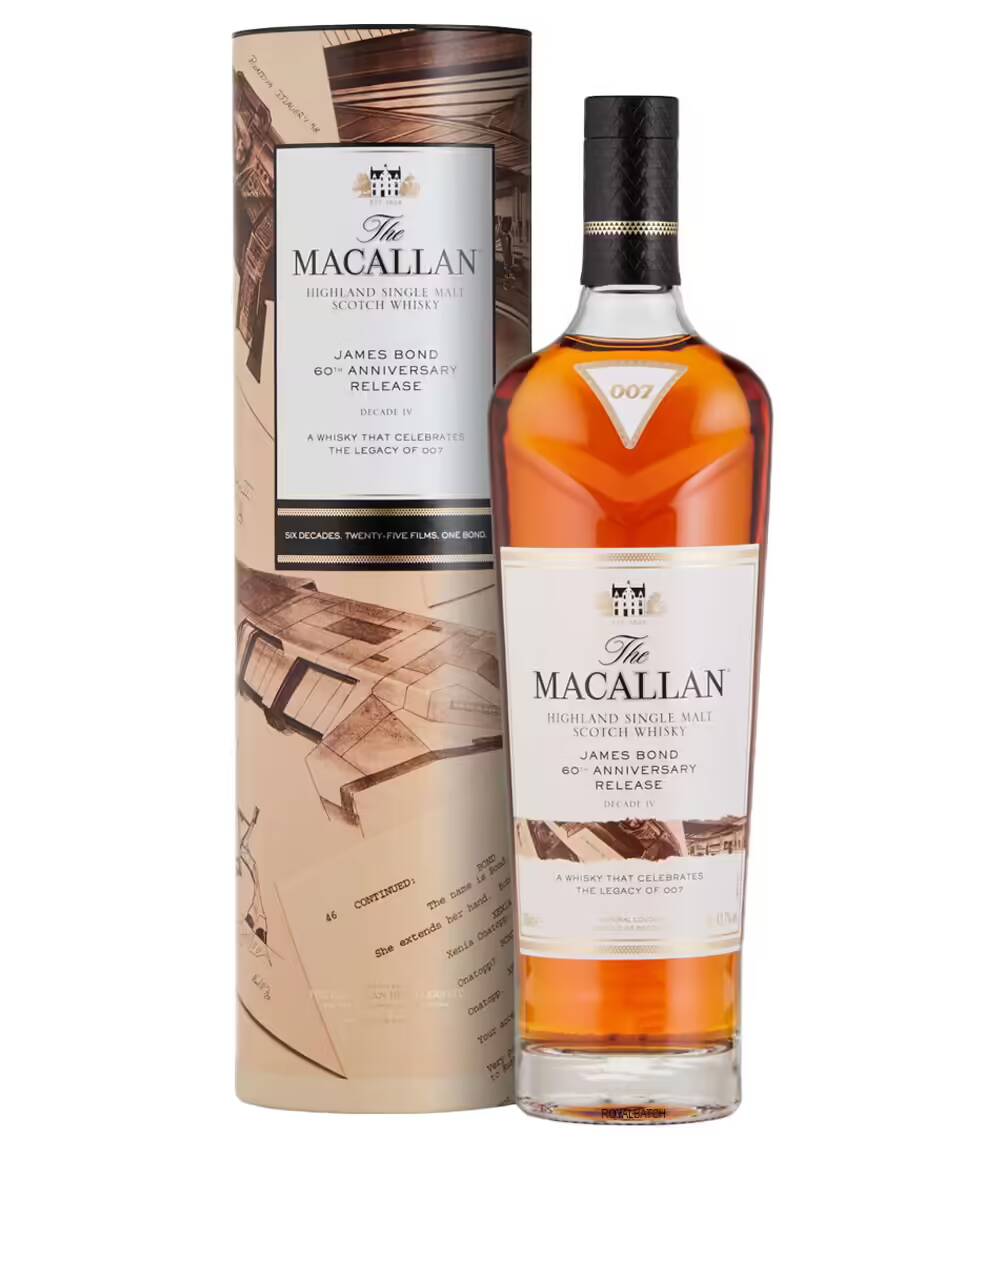 The Macallan James Bond 60th Anniversary Release Decade IV Scotch Whisky